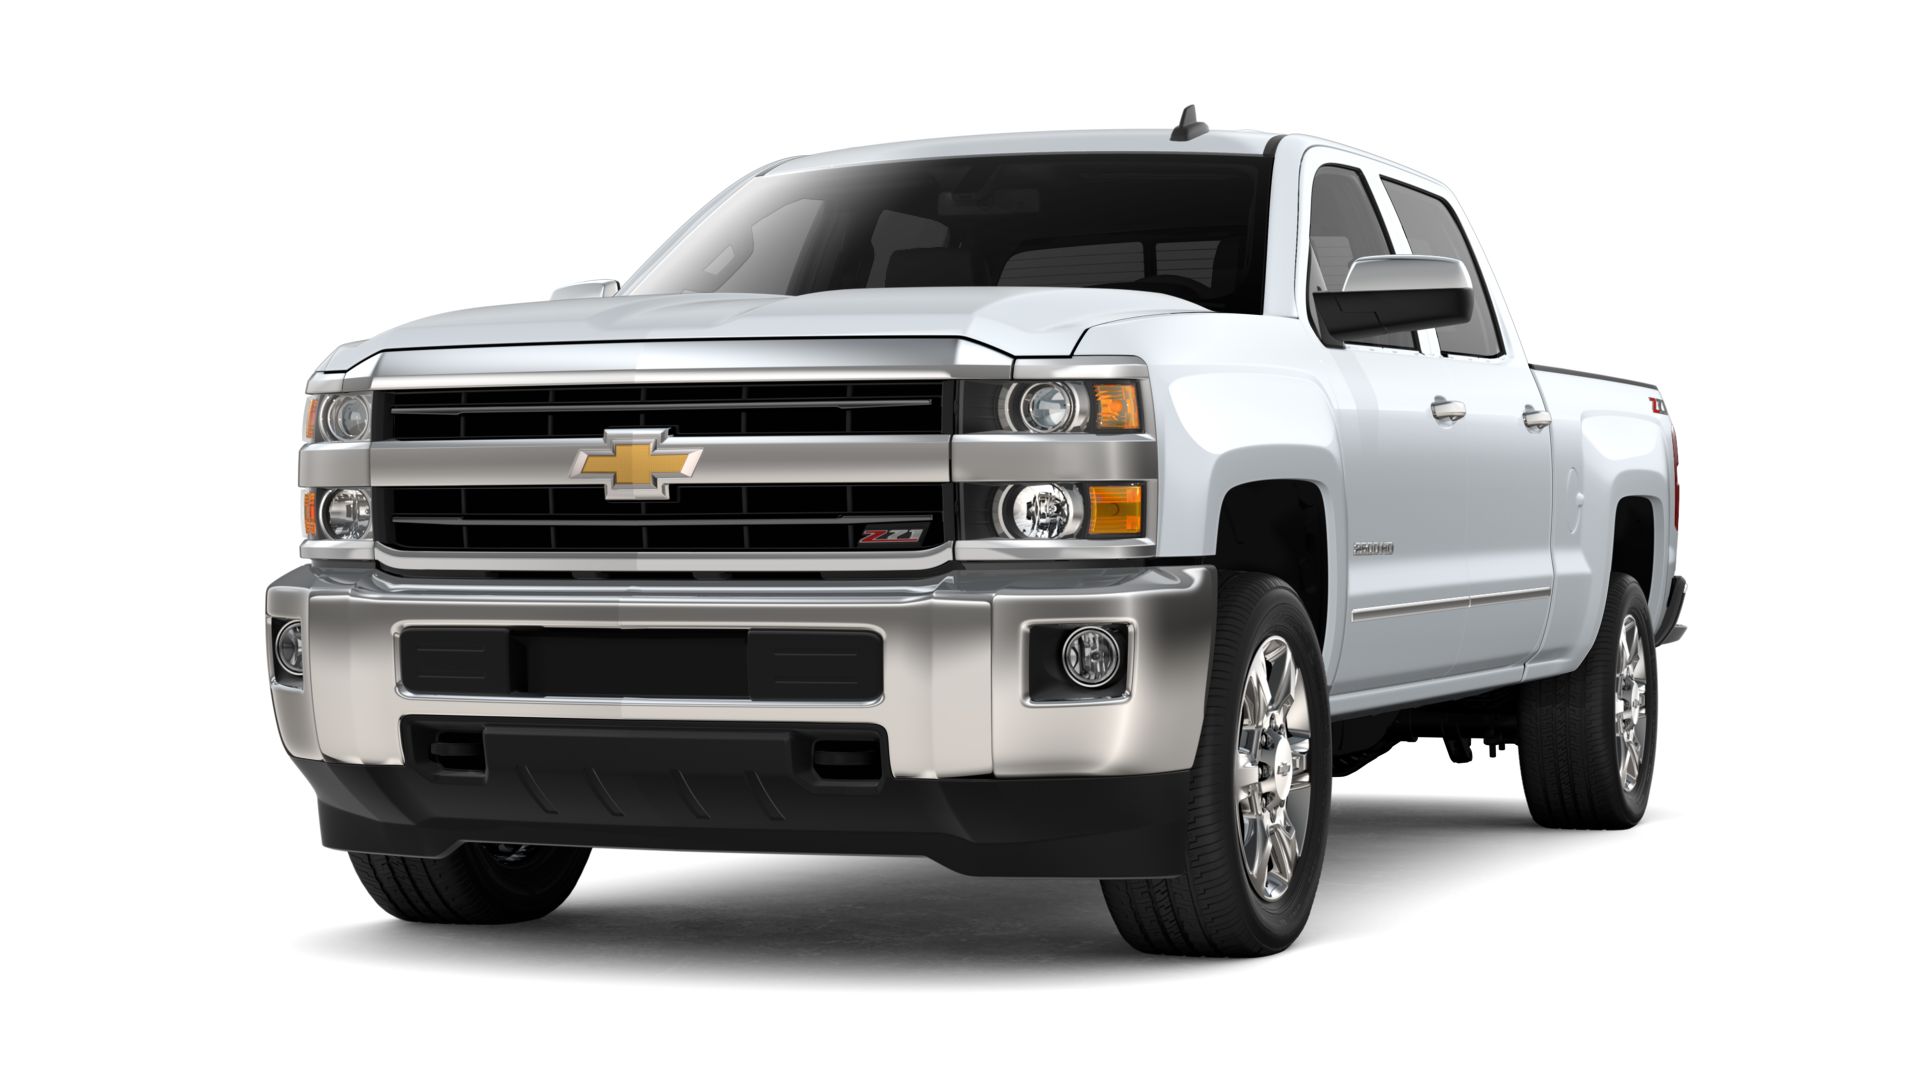 2019 Silverado HD Gets New Chrome Grille | GM Authority